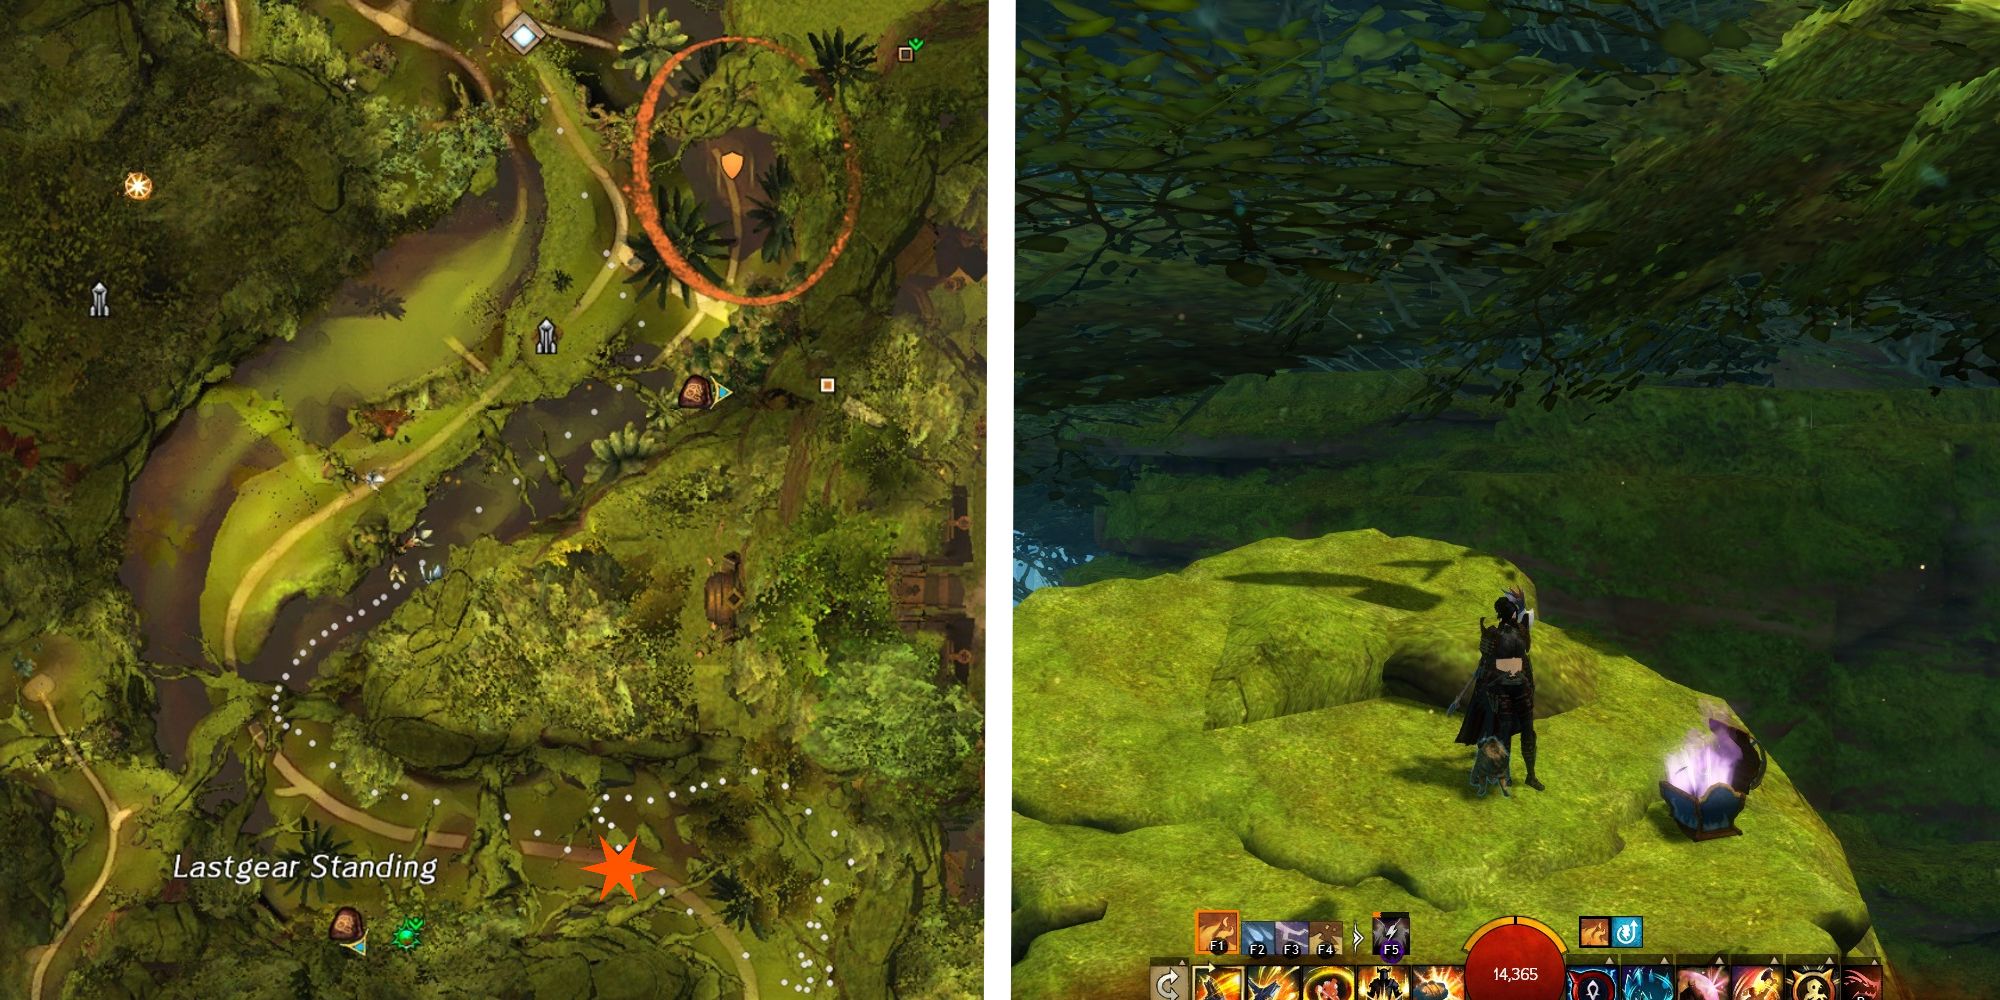 map of route to slice of sky box next to image of player standing at the strongbox